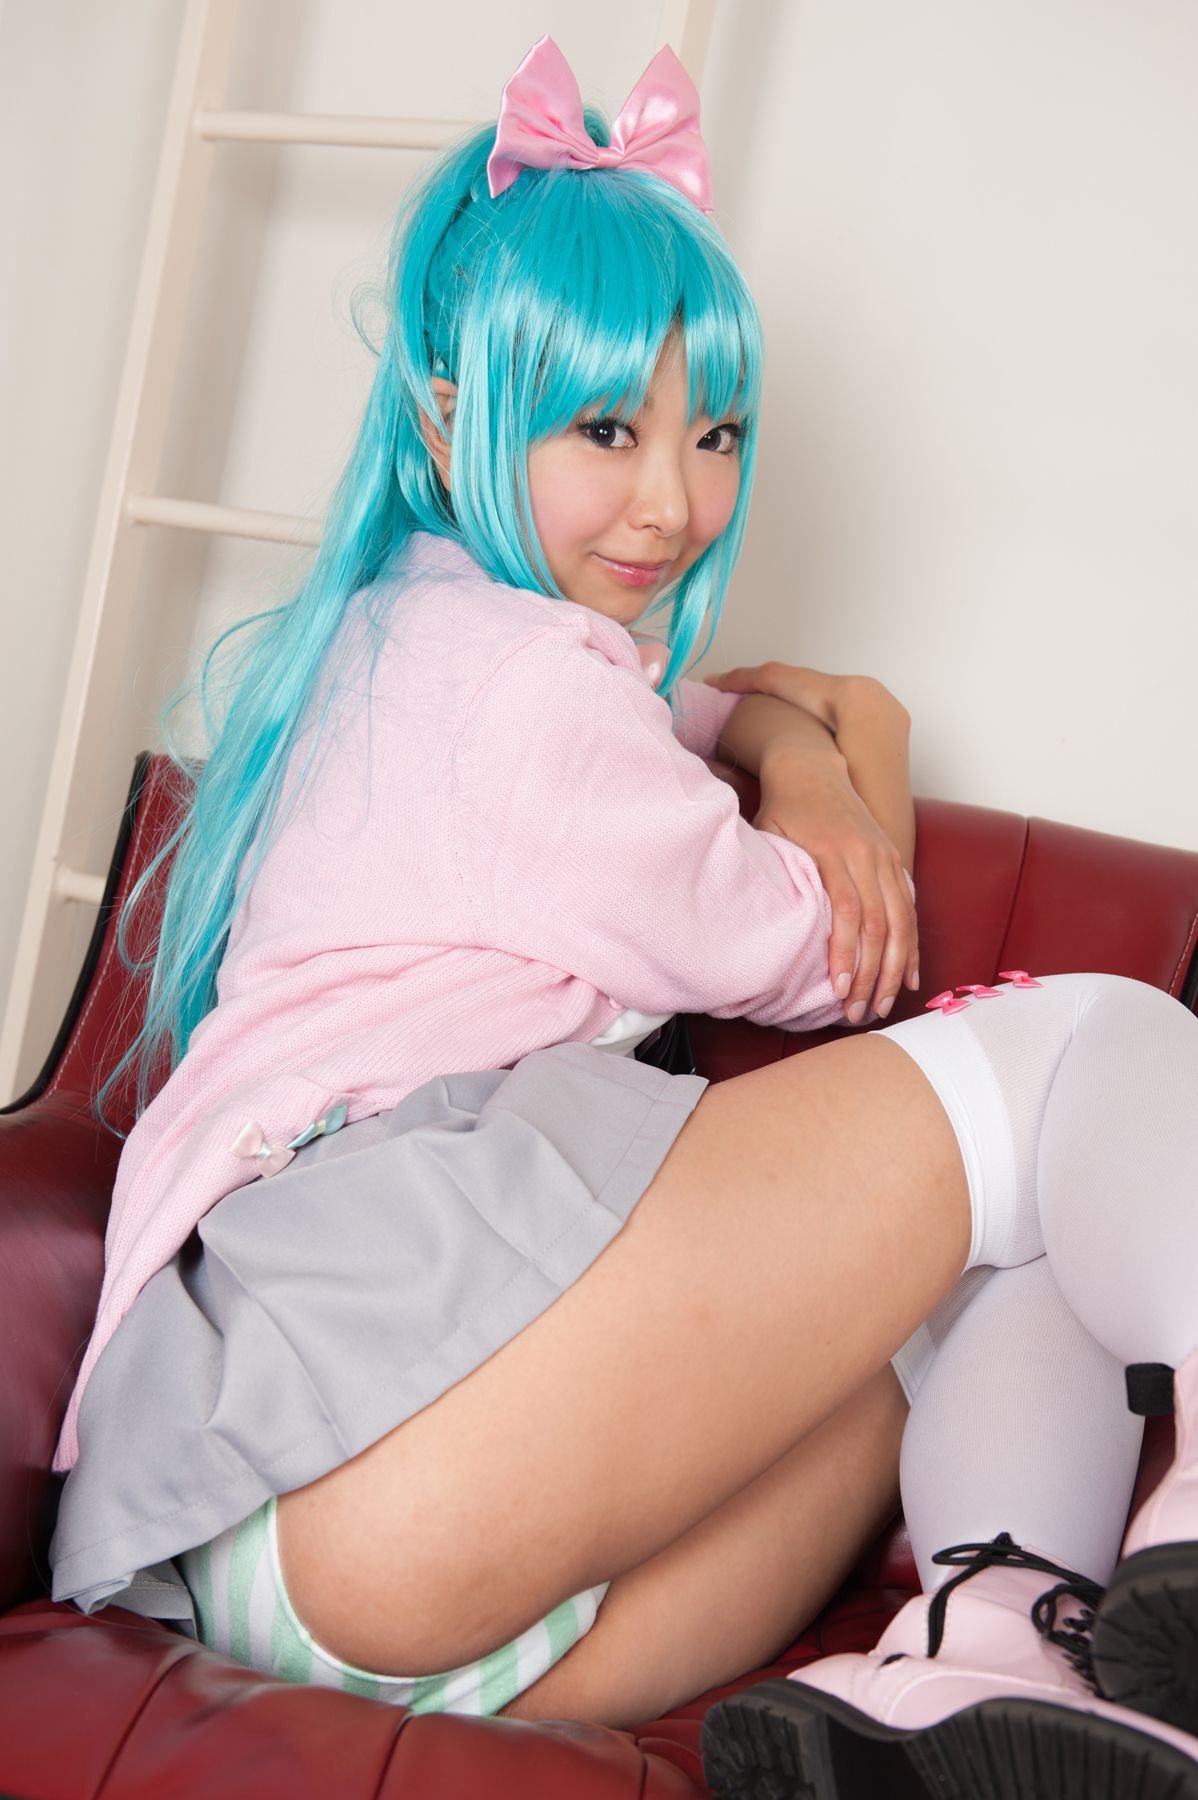 [Cosplay] Necoco as Hatsune Miku from Vocaloid [170P]